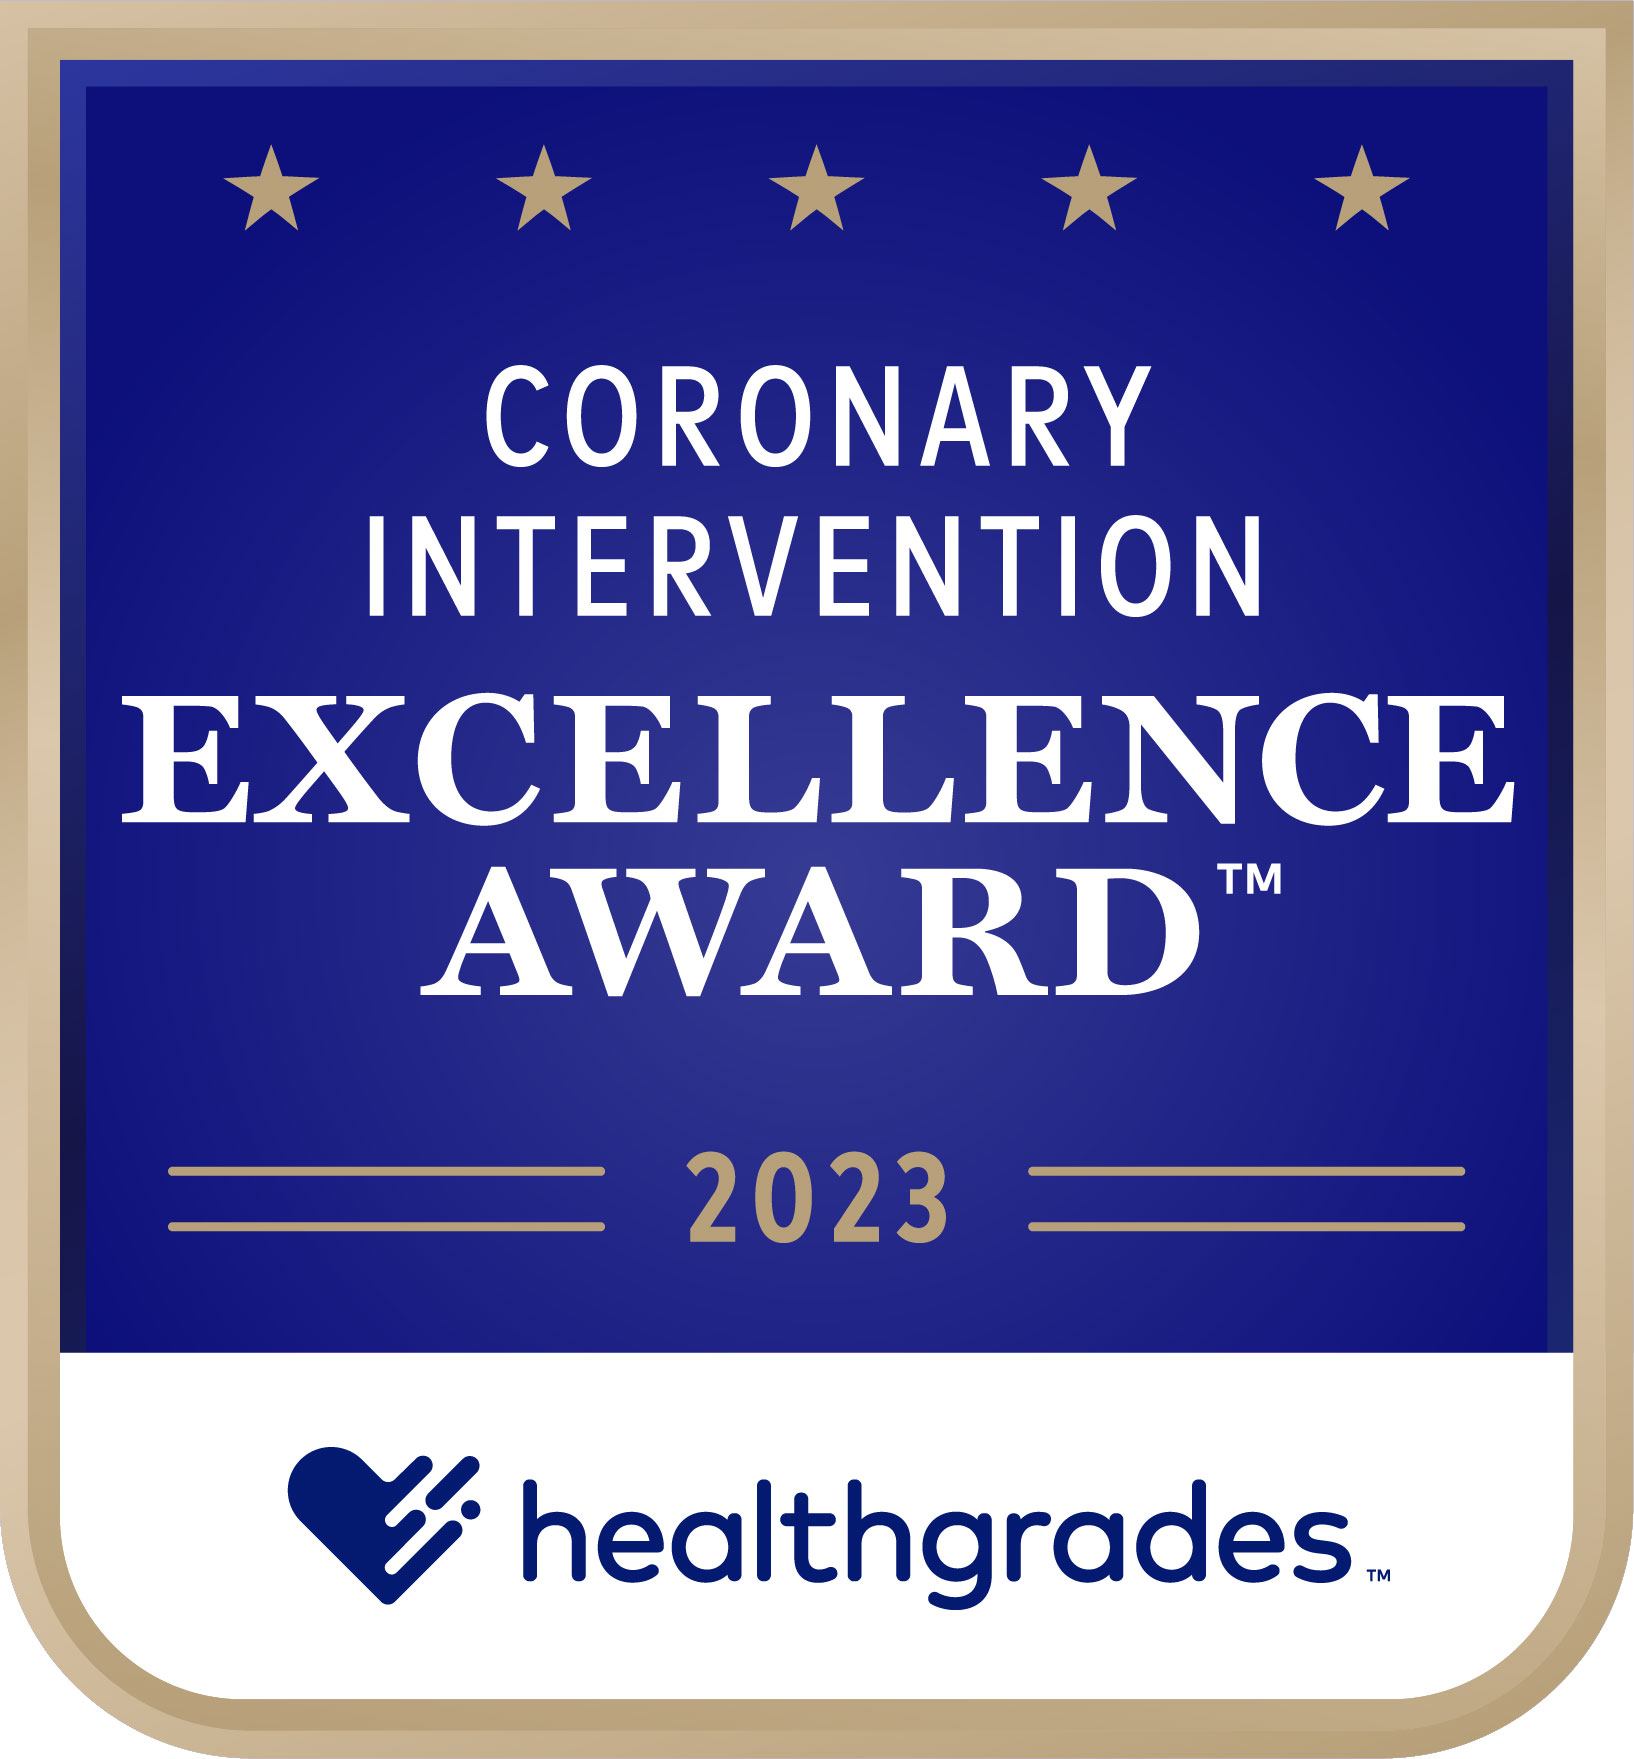 HG_Coronary_Intervention_Excellence_Award_Image_2023